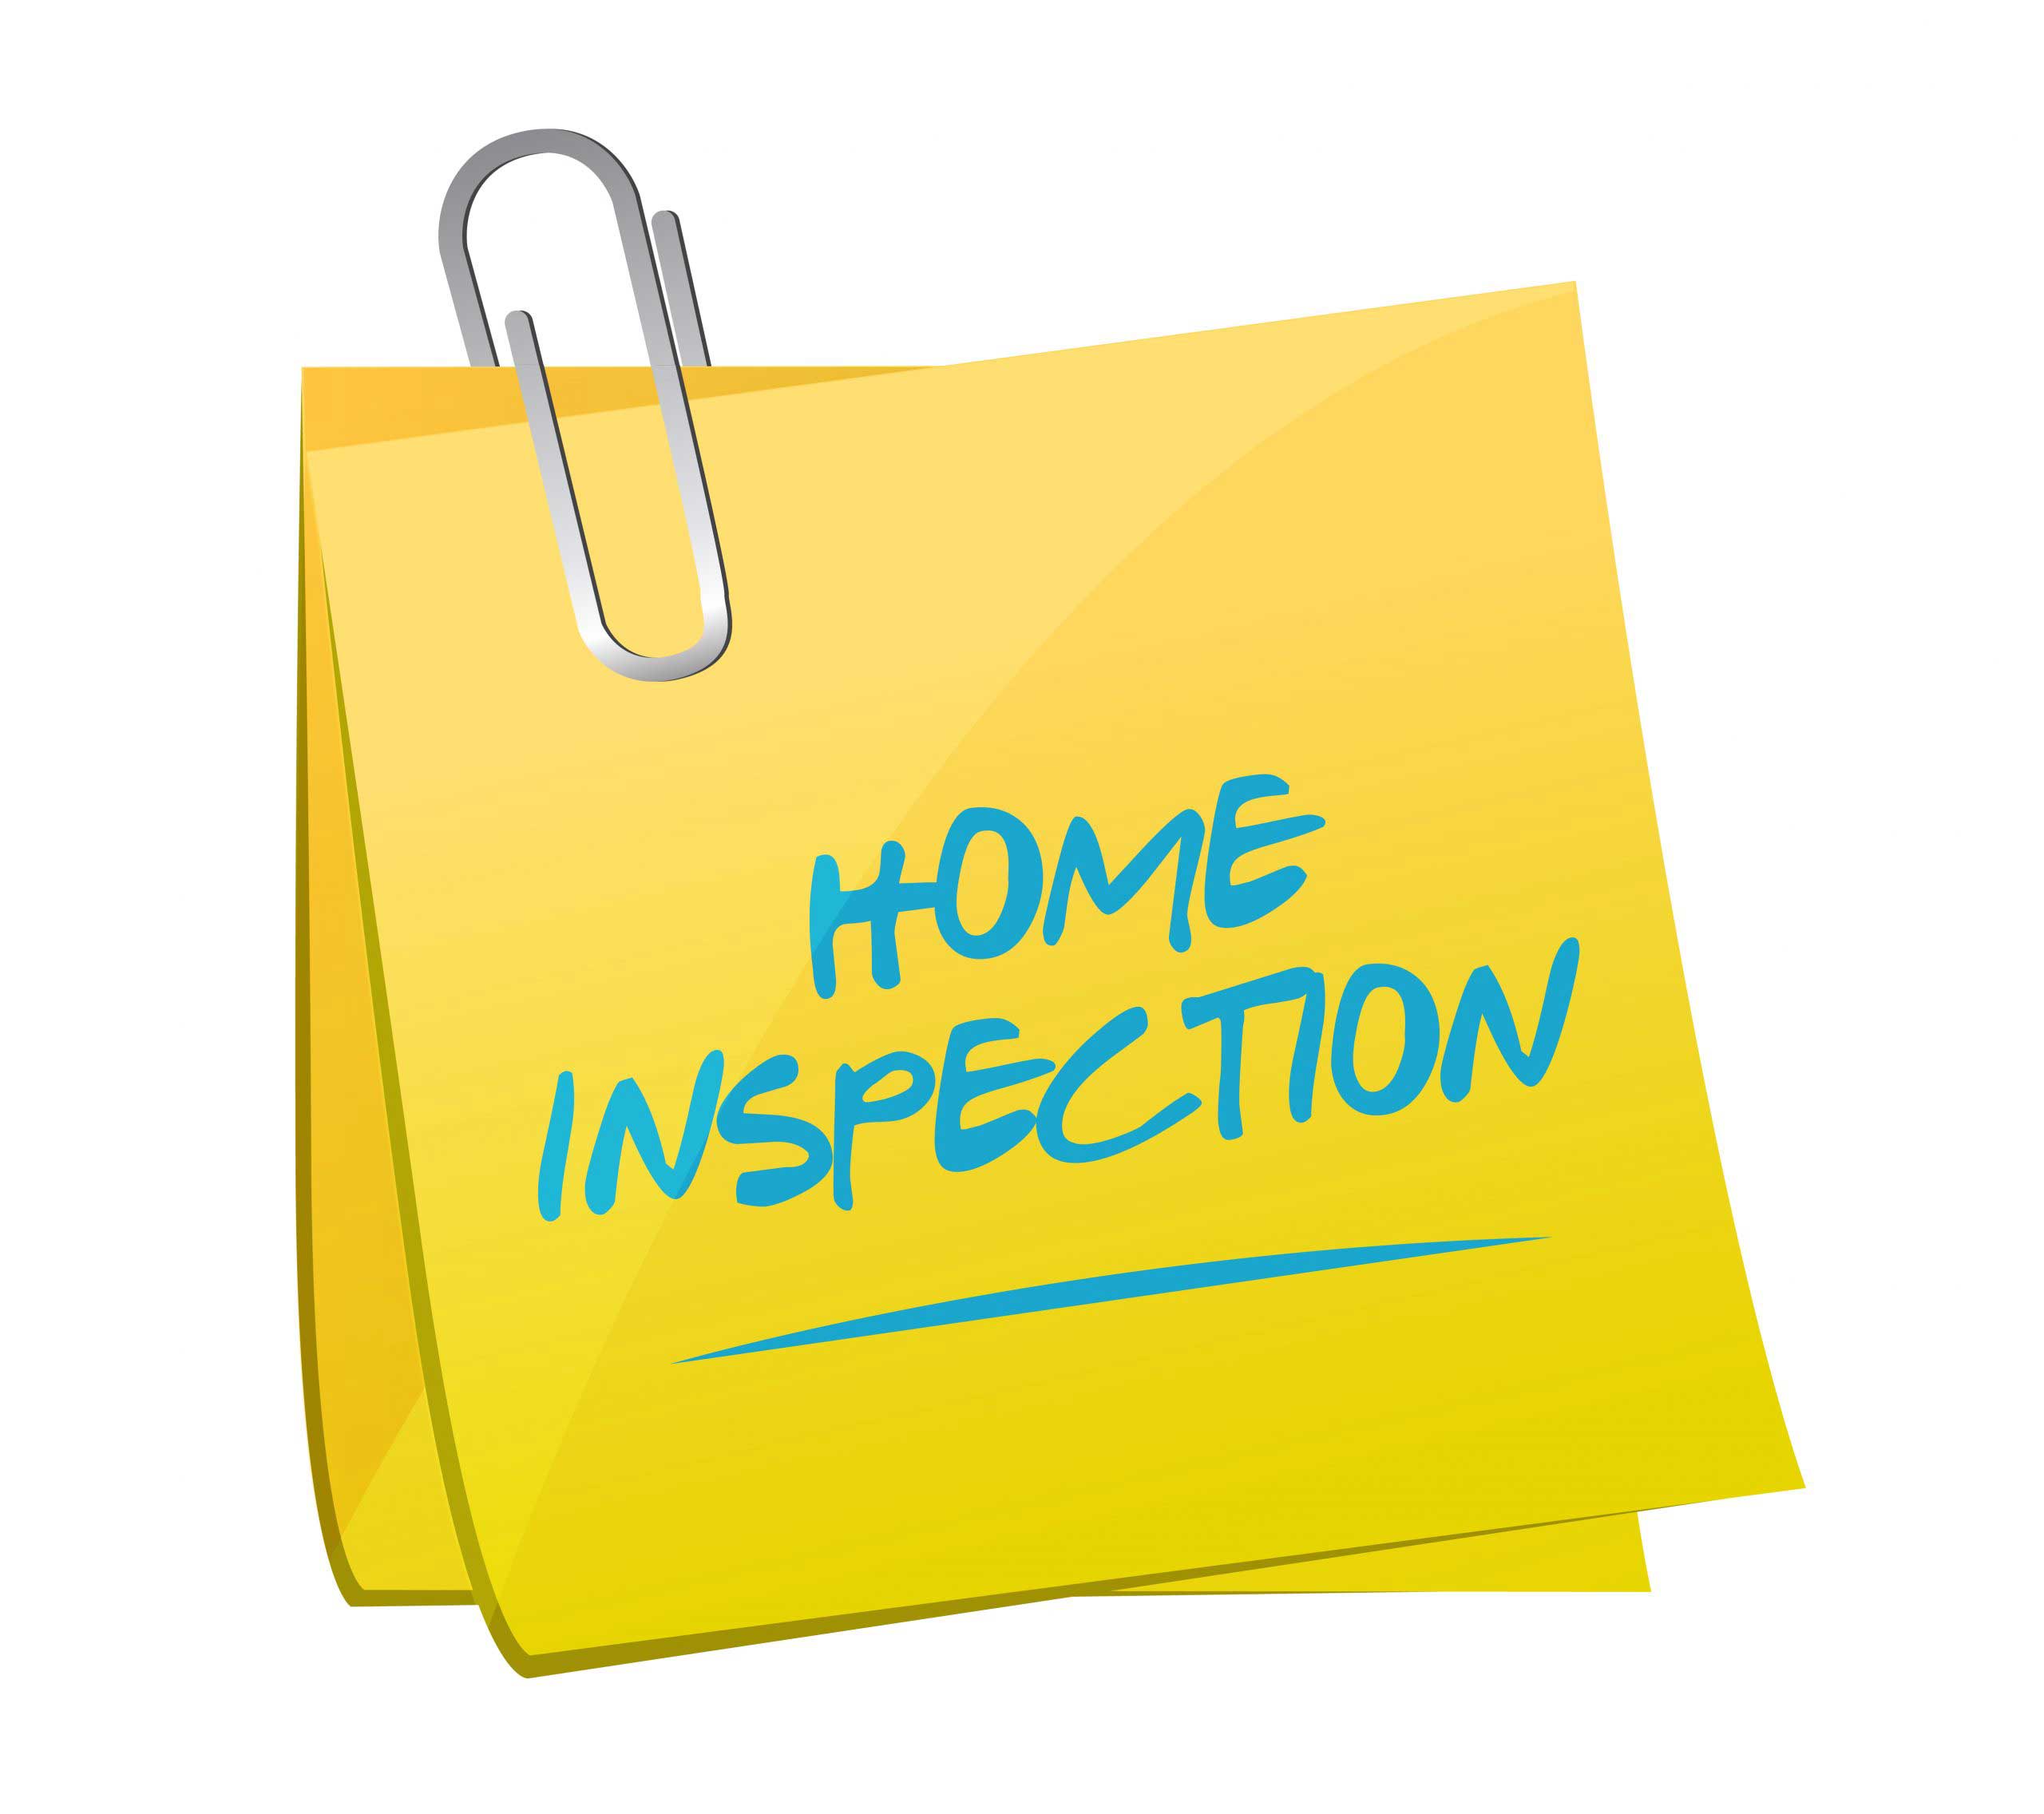 Reasons to get a home inspection